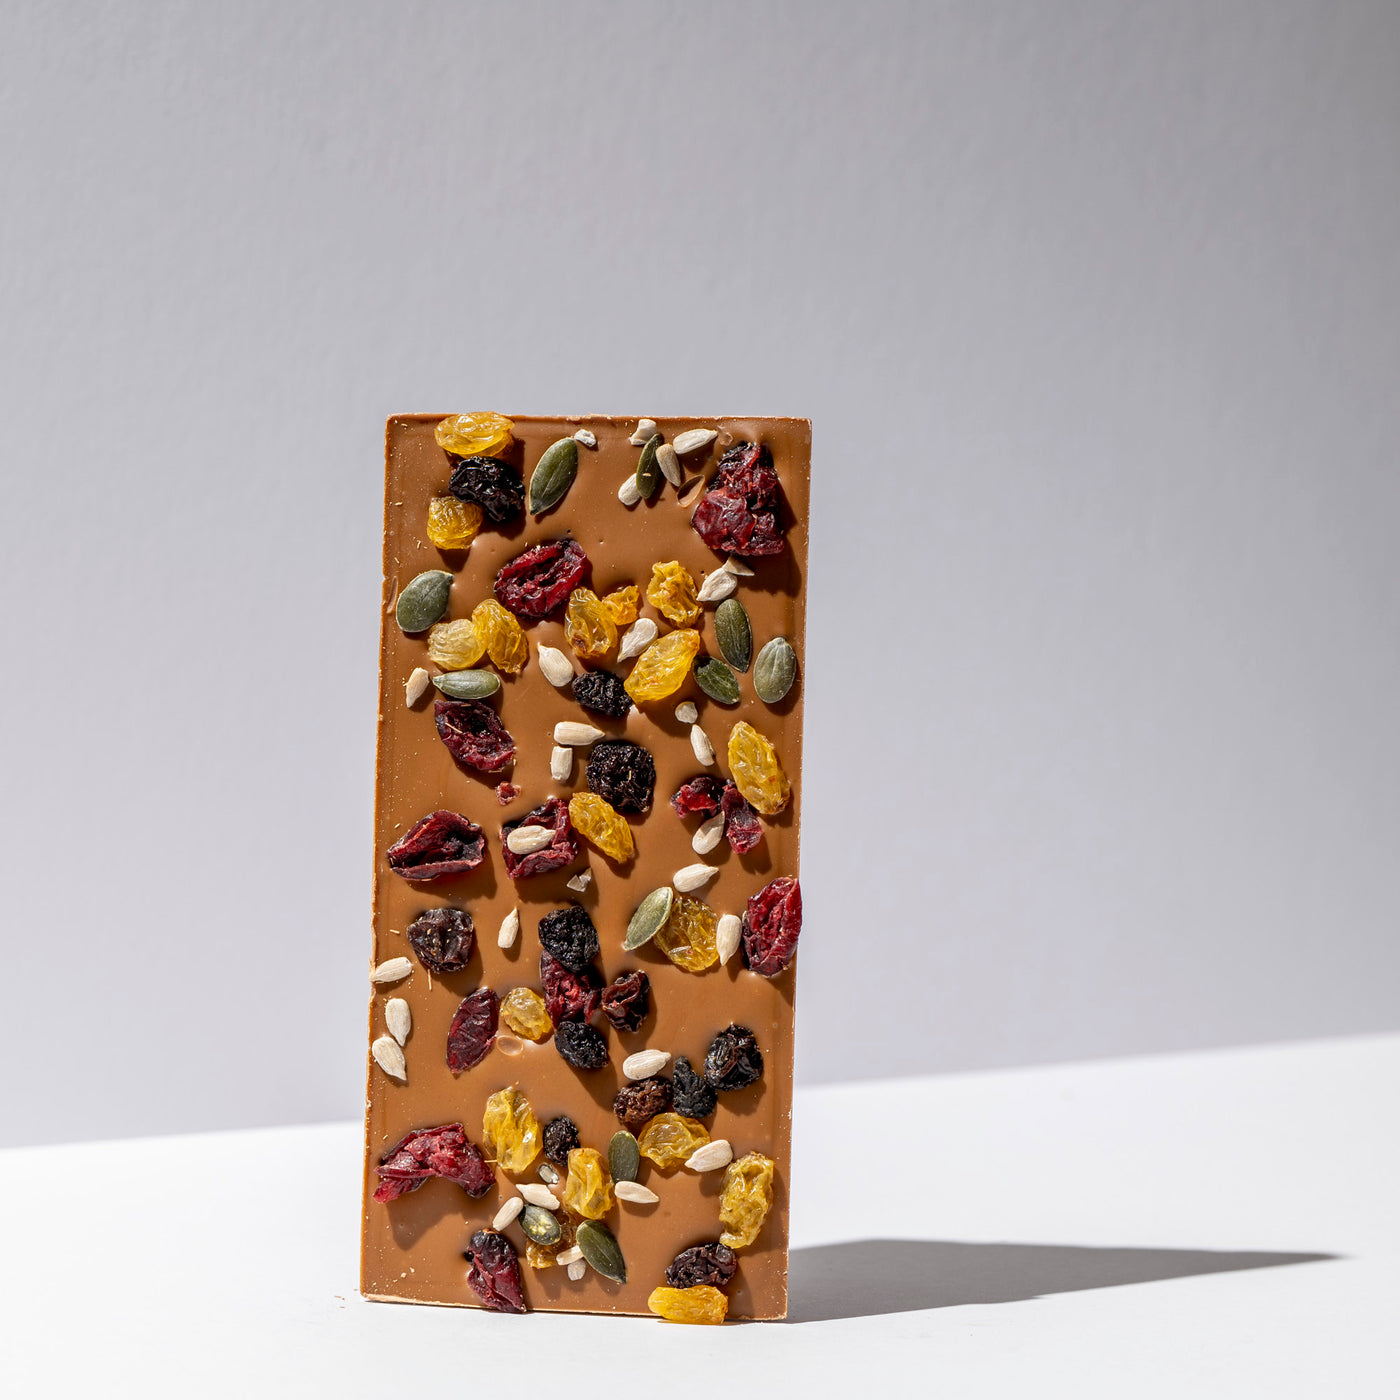 Caramel infused chocolate with Fruit and Seeds